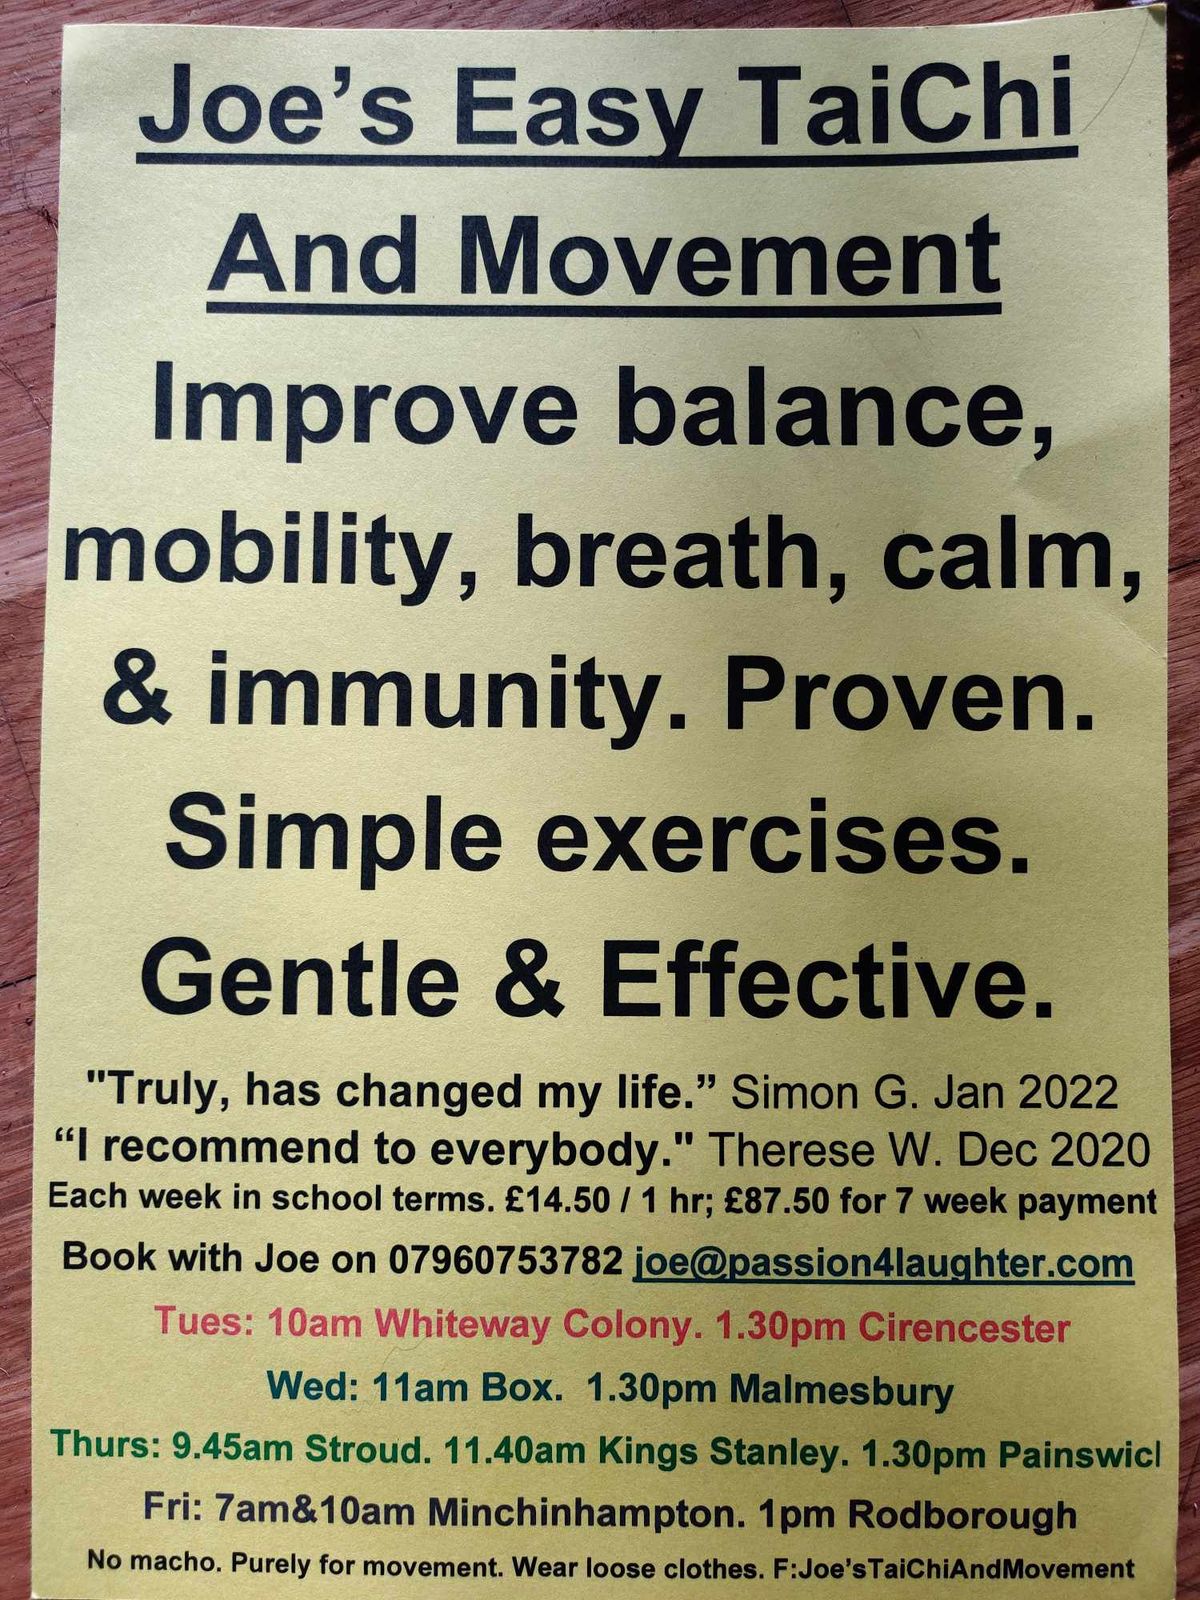 Joe's Easy TaiChi And Movement. Painswick 1.30pm Thursdays. Plus 9 other groups in the area.